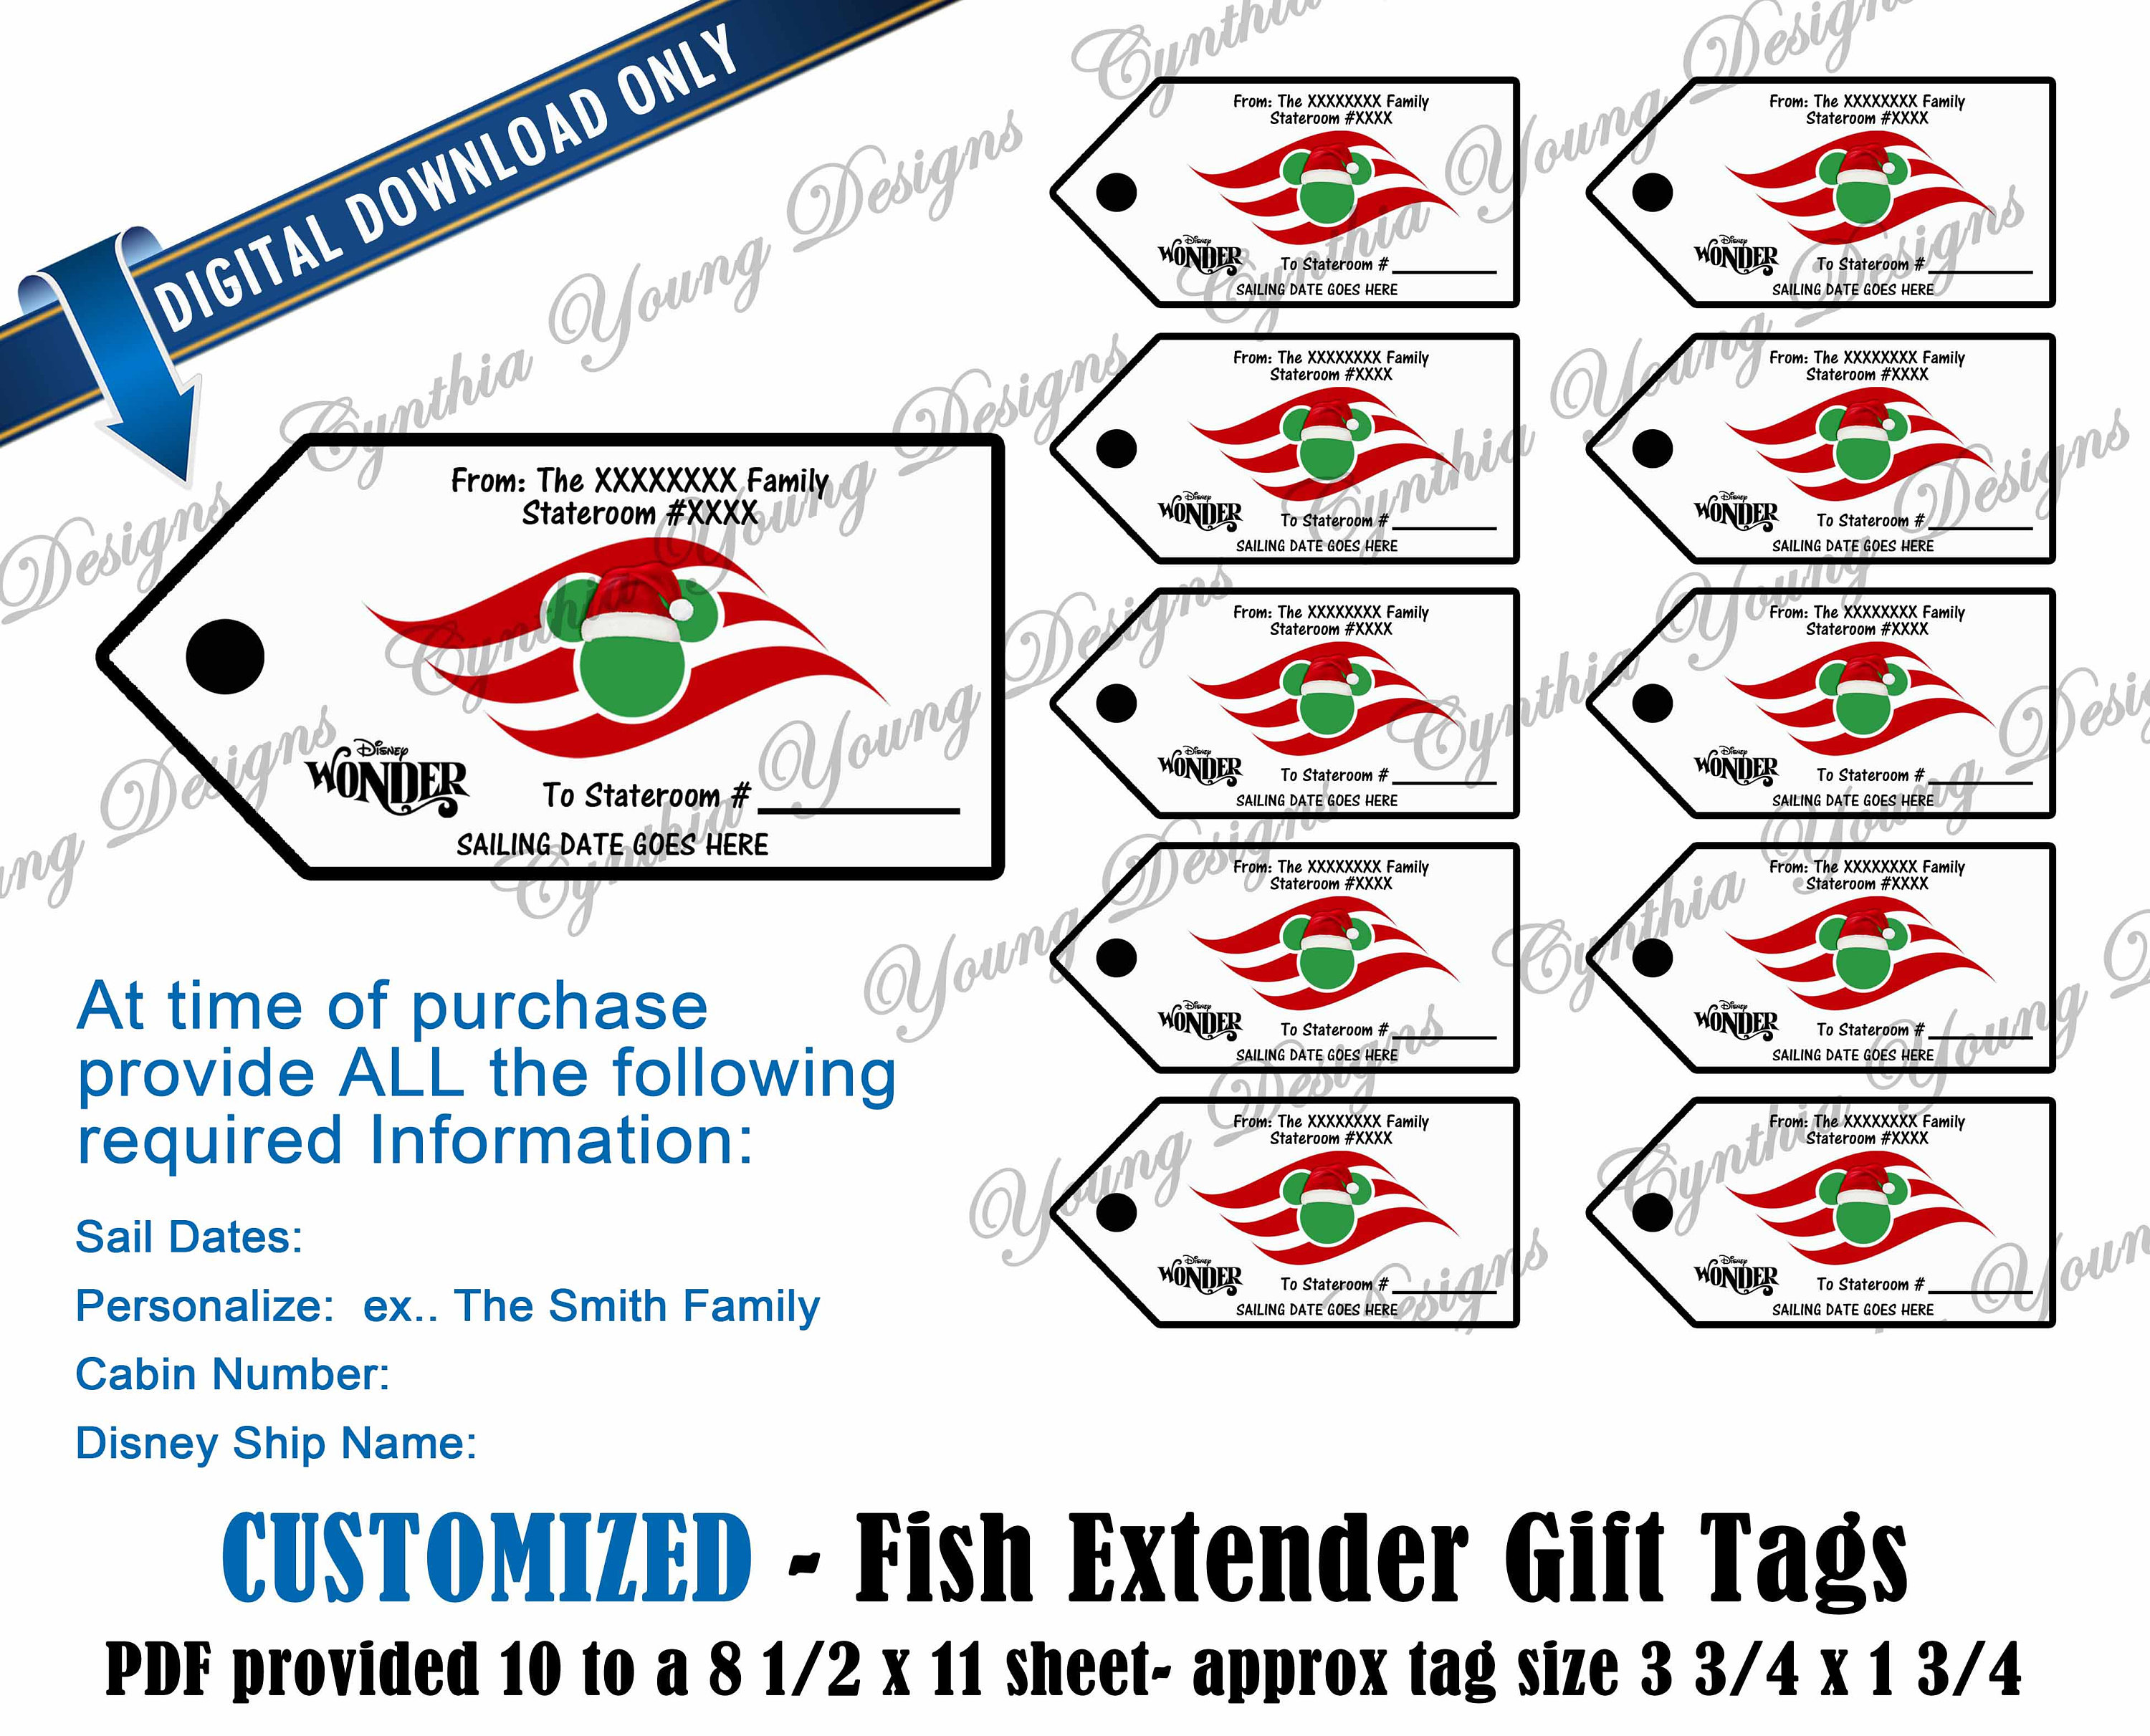 Fish Extender Gift Tags| Customized With YOUR Personal Information|  Christmas FE Gift Tags| DCL Very Merrytime Cruise | Digital Download